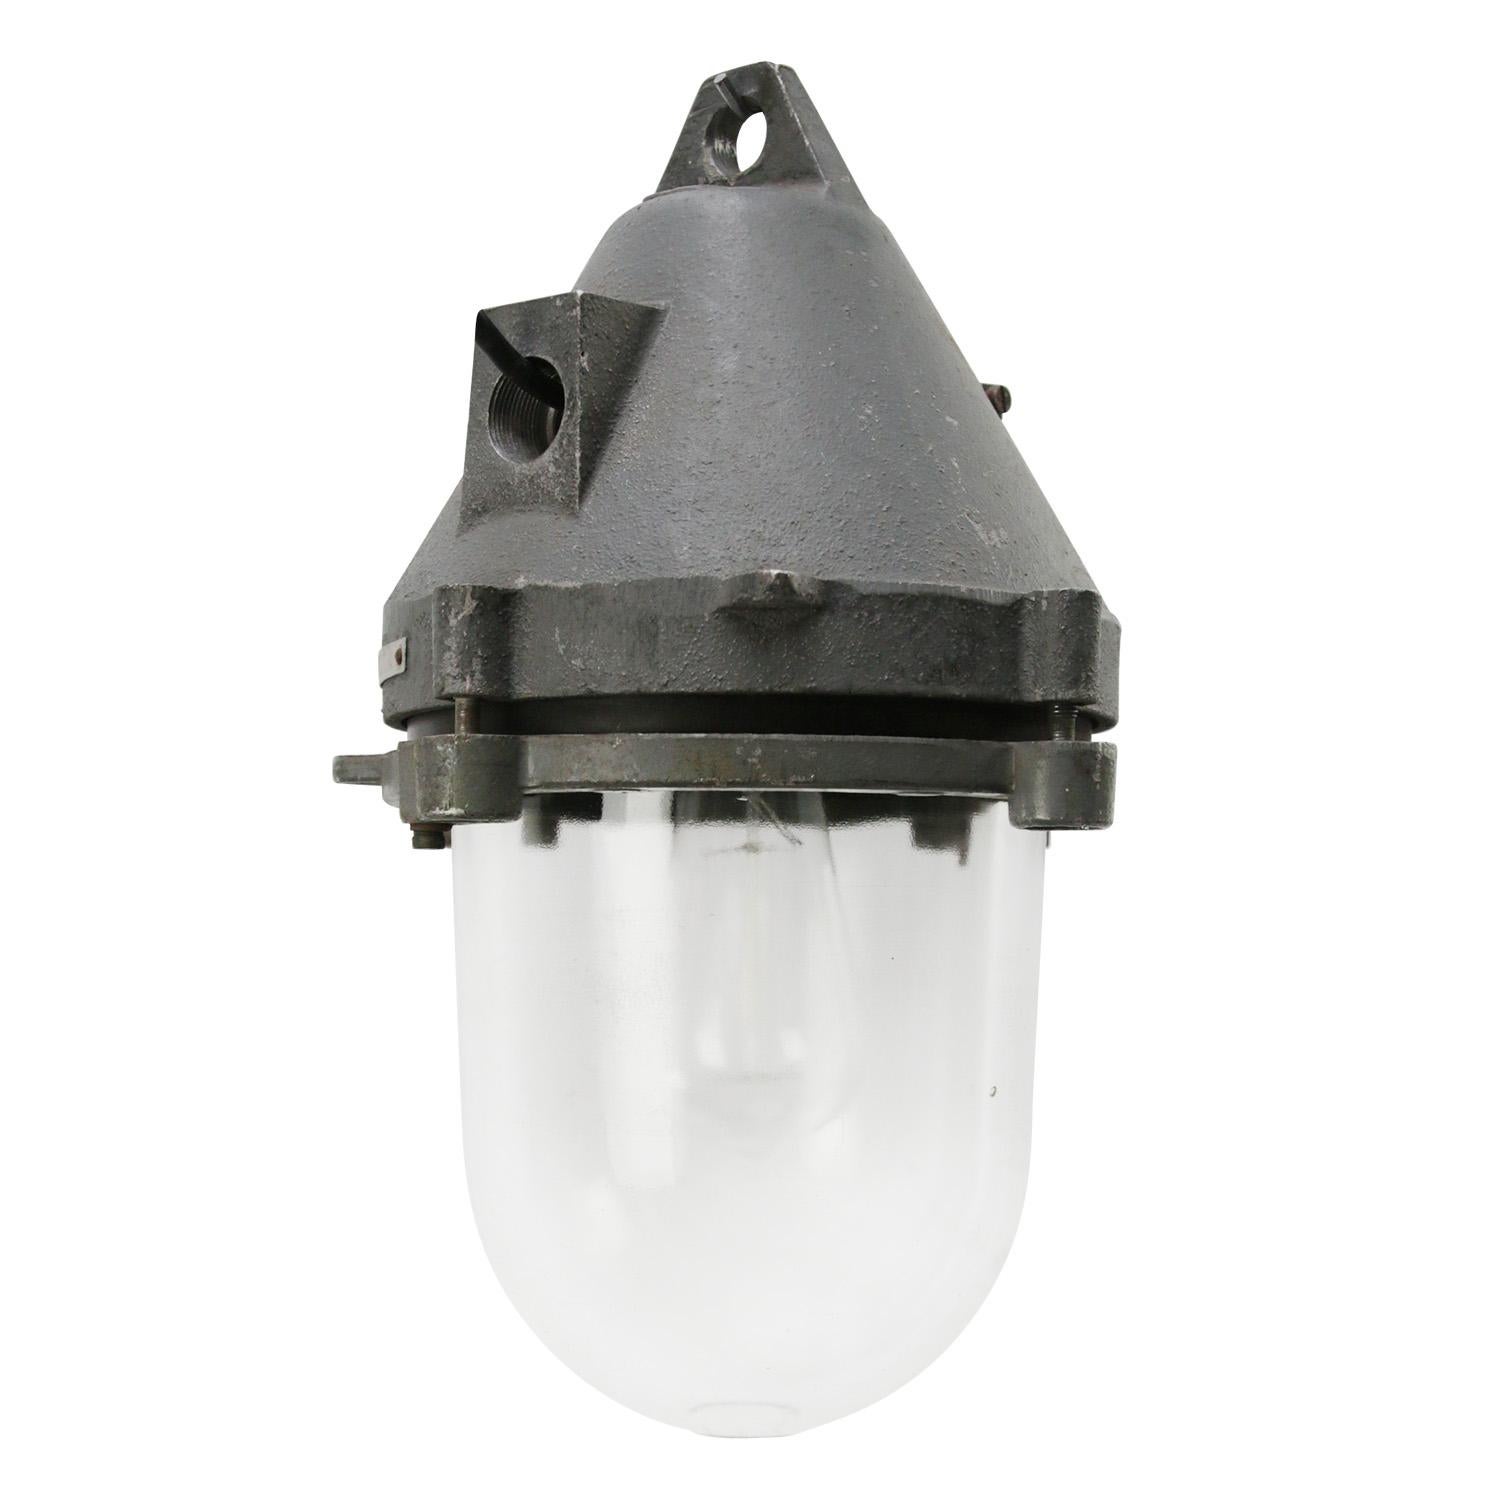 Industrial hanging lamp.
Grey aluminum clear glass.

Weight: 5.00 kg / 11 lb

Priced per individual item. All lamps have been made suitable by international standards for incandescent light bulbs, energy-efficient and LED bulbs. E26/E27 bulb